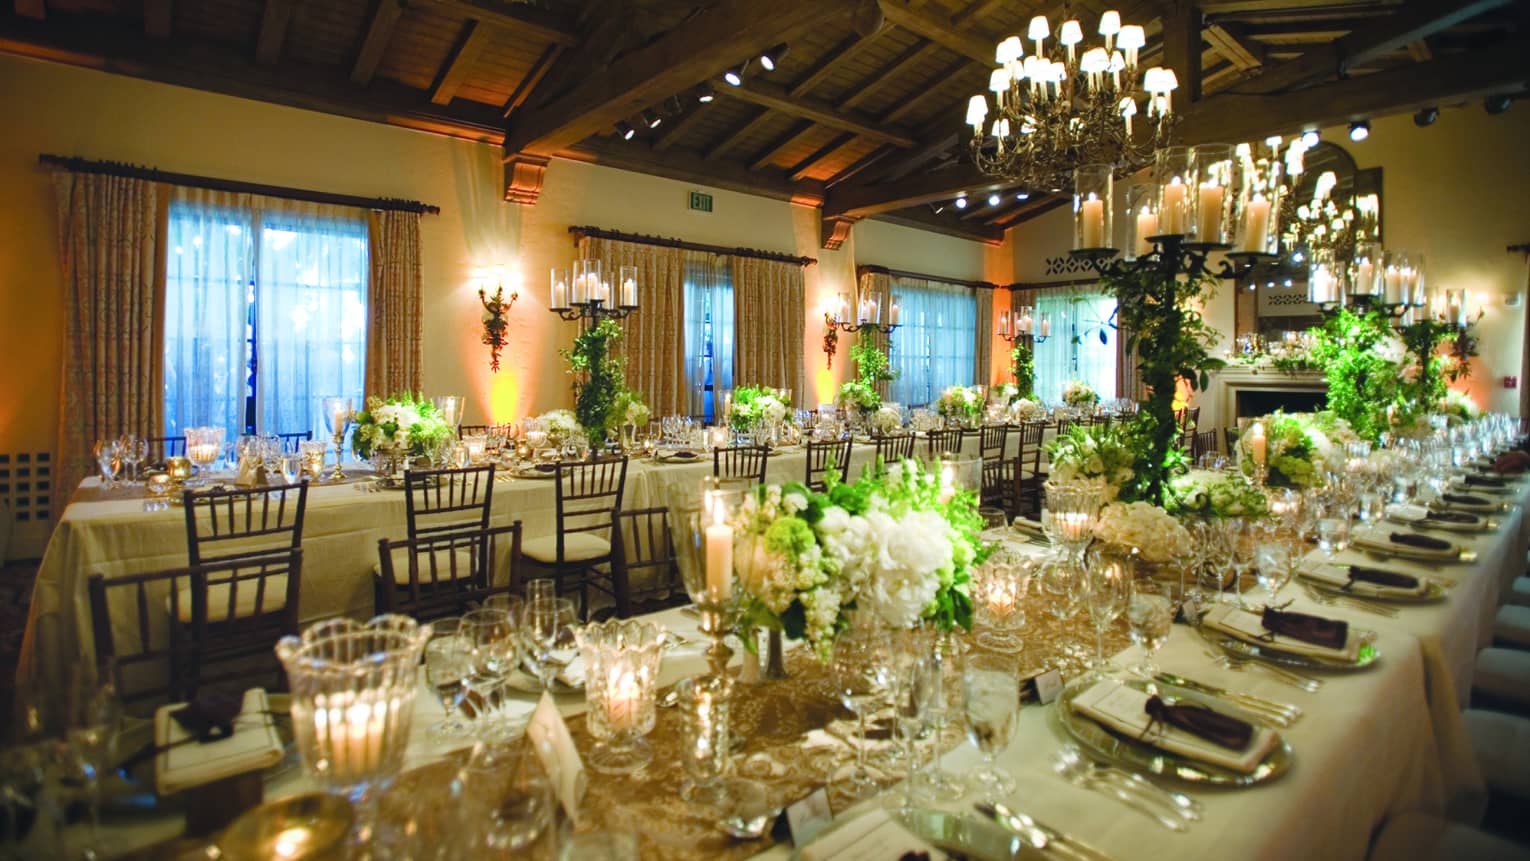 Long wedding banquet tables with glowing candles, white flowers 